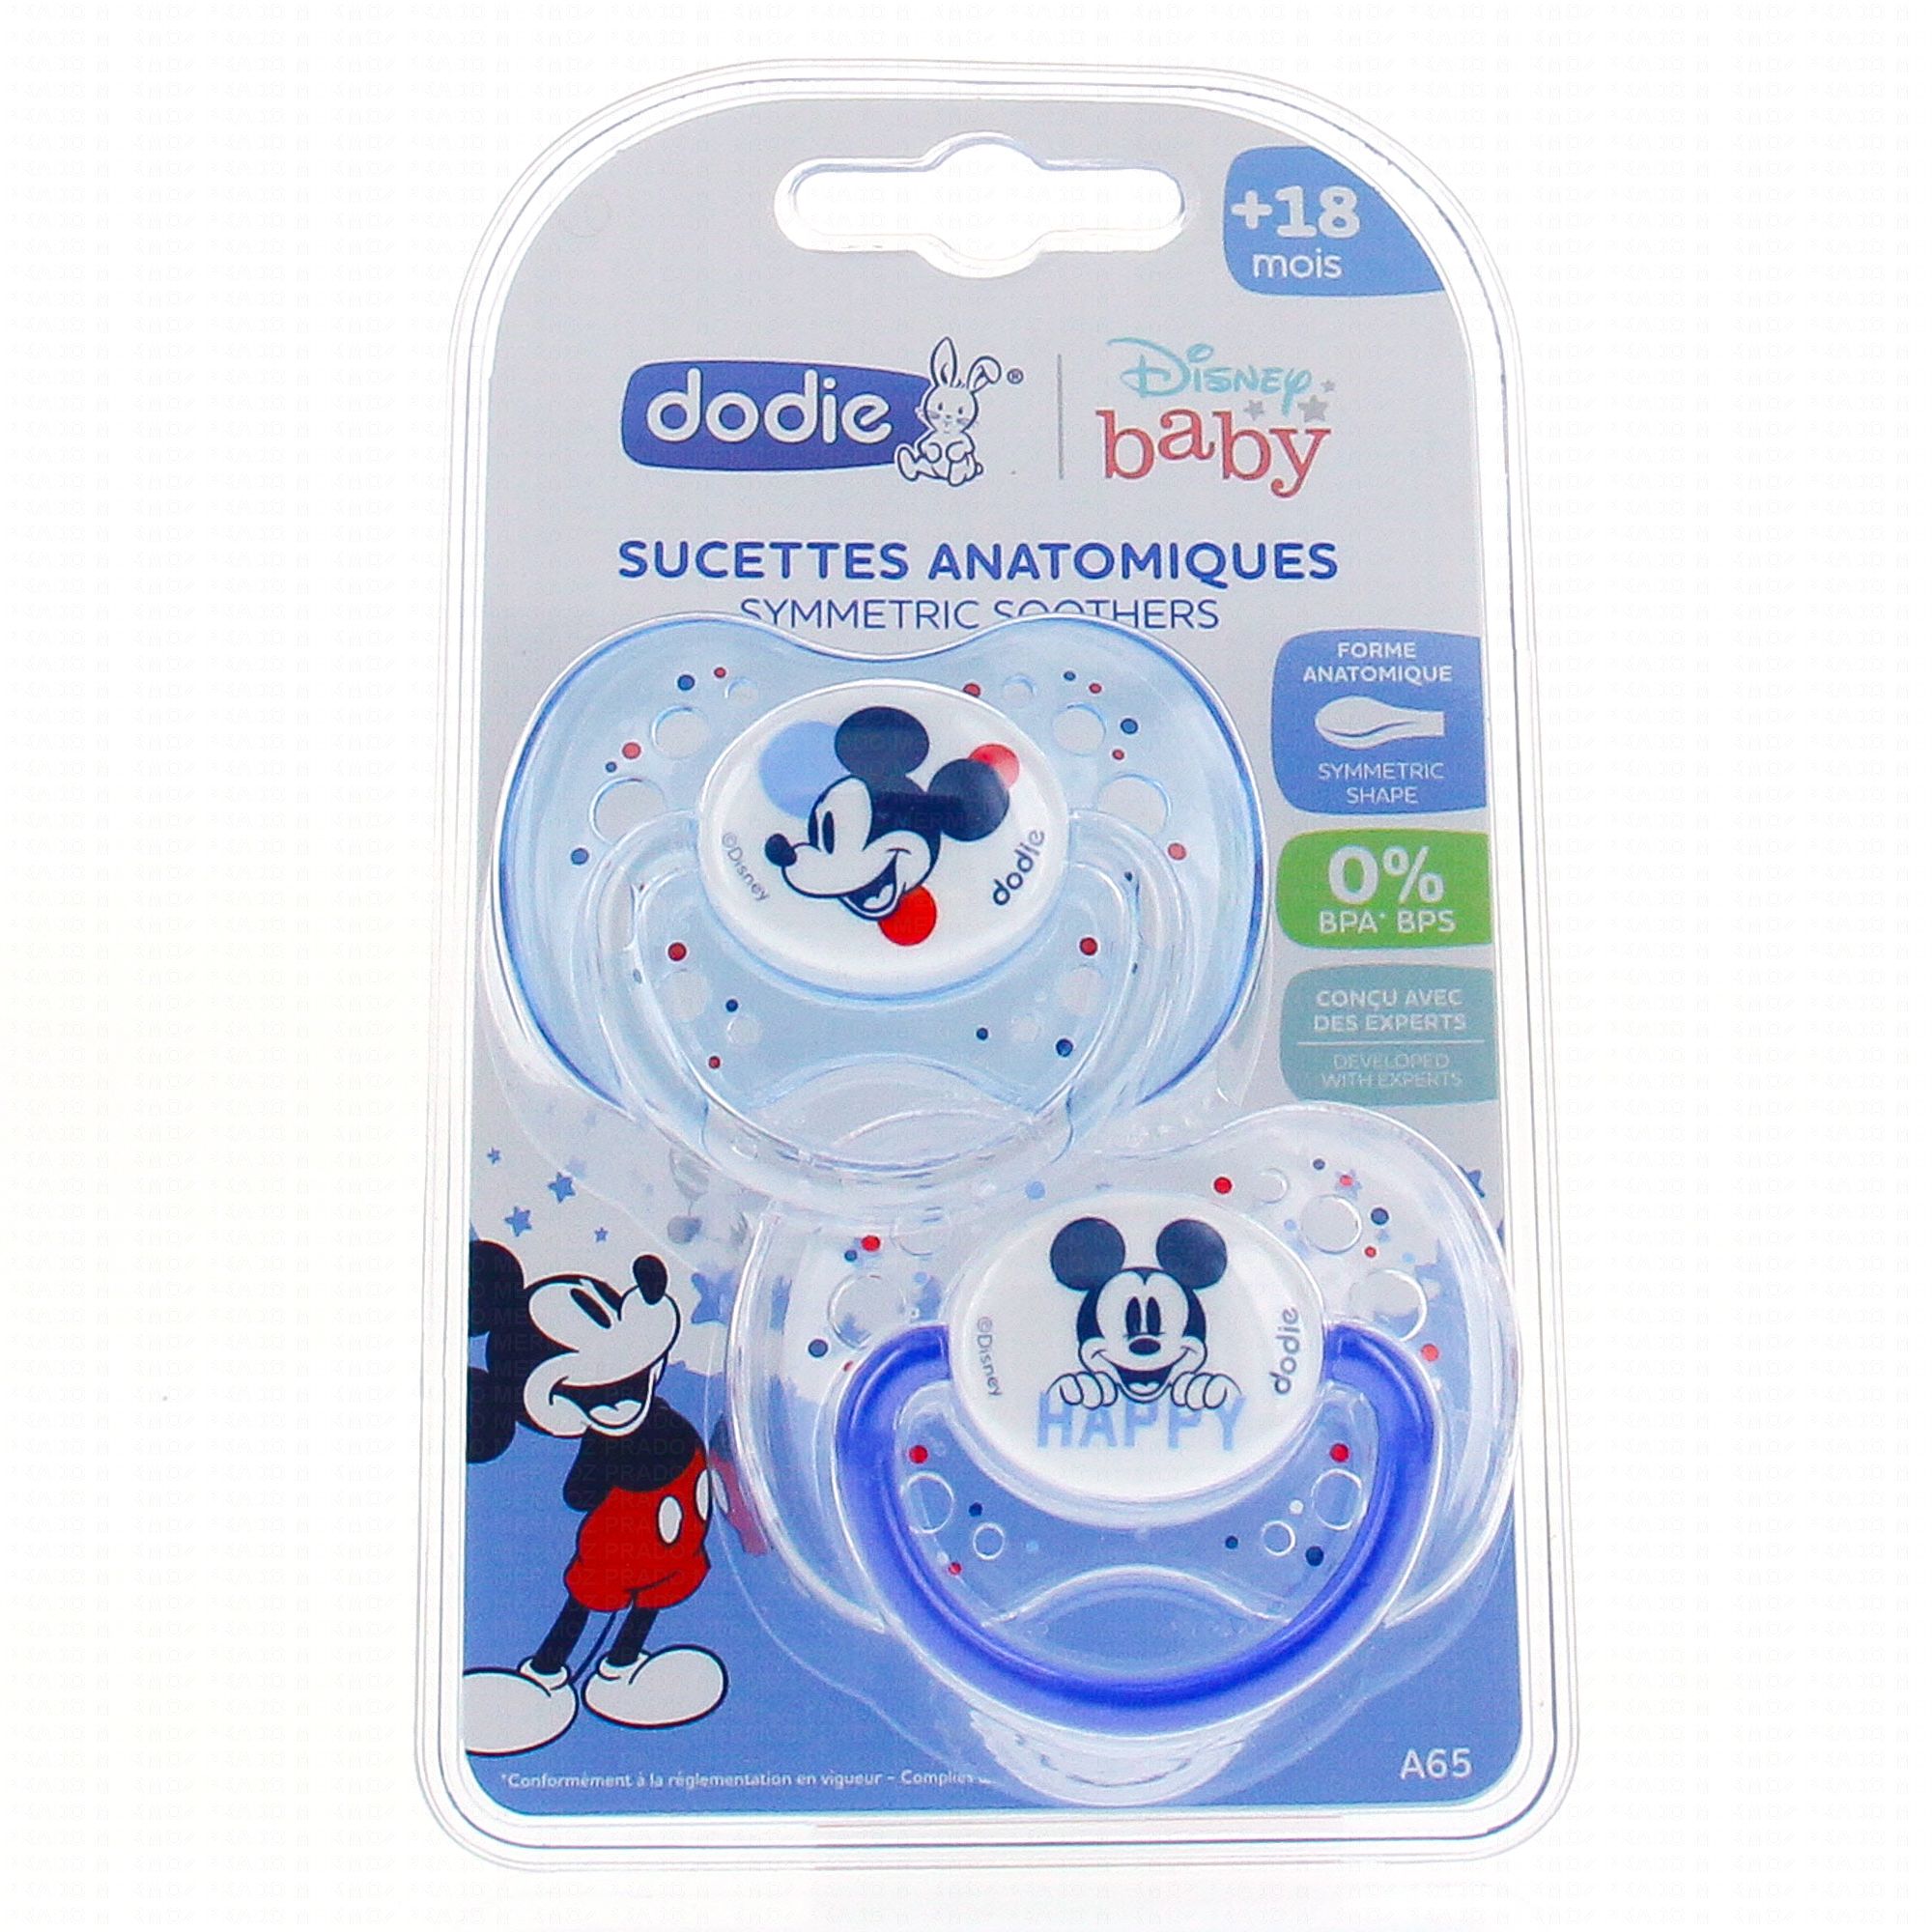 Dodie Sucette anatomique +18 mois DUO MICKEY A65 2 pièces